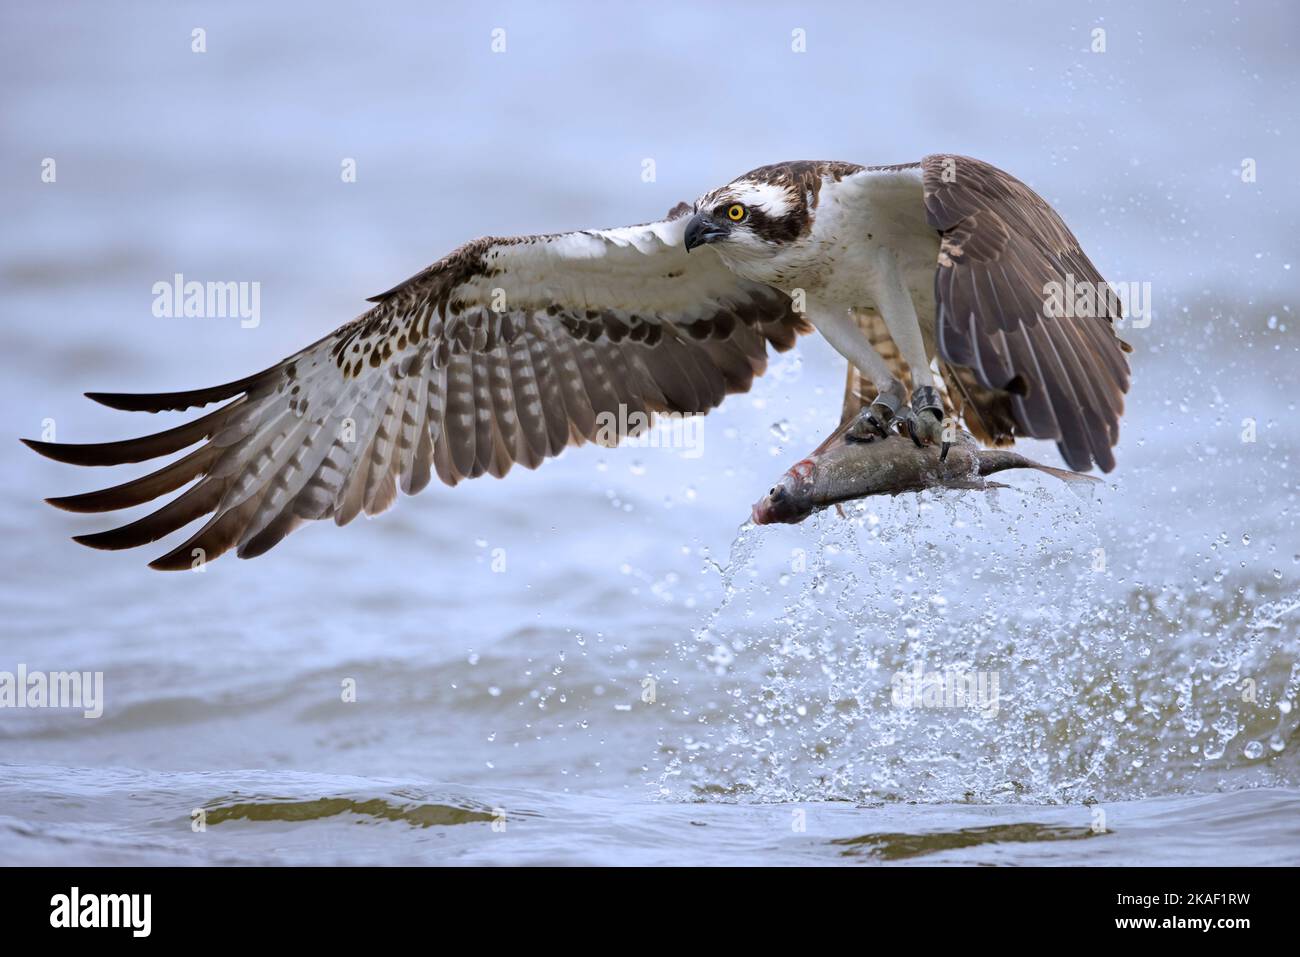 Western osprey (Pandion haliaetus) flying over lake with caught fish in its talons / claw Stock Photo